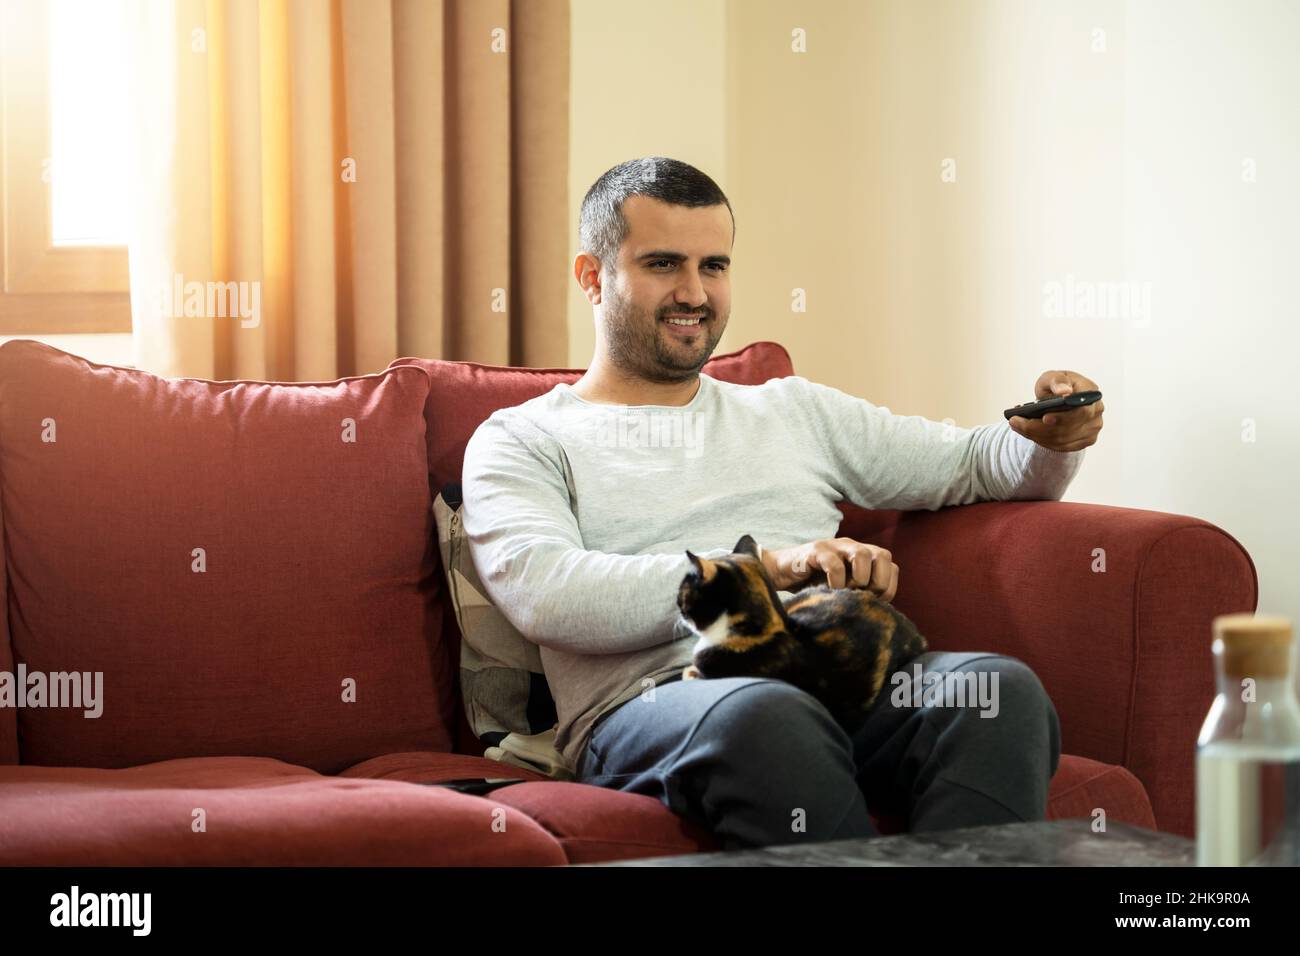 Close up photo of man holding tv remote control and relaxing with the cat. concept of tv watching. Stock Photo